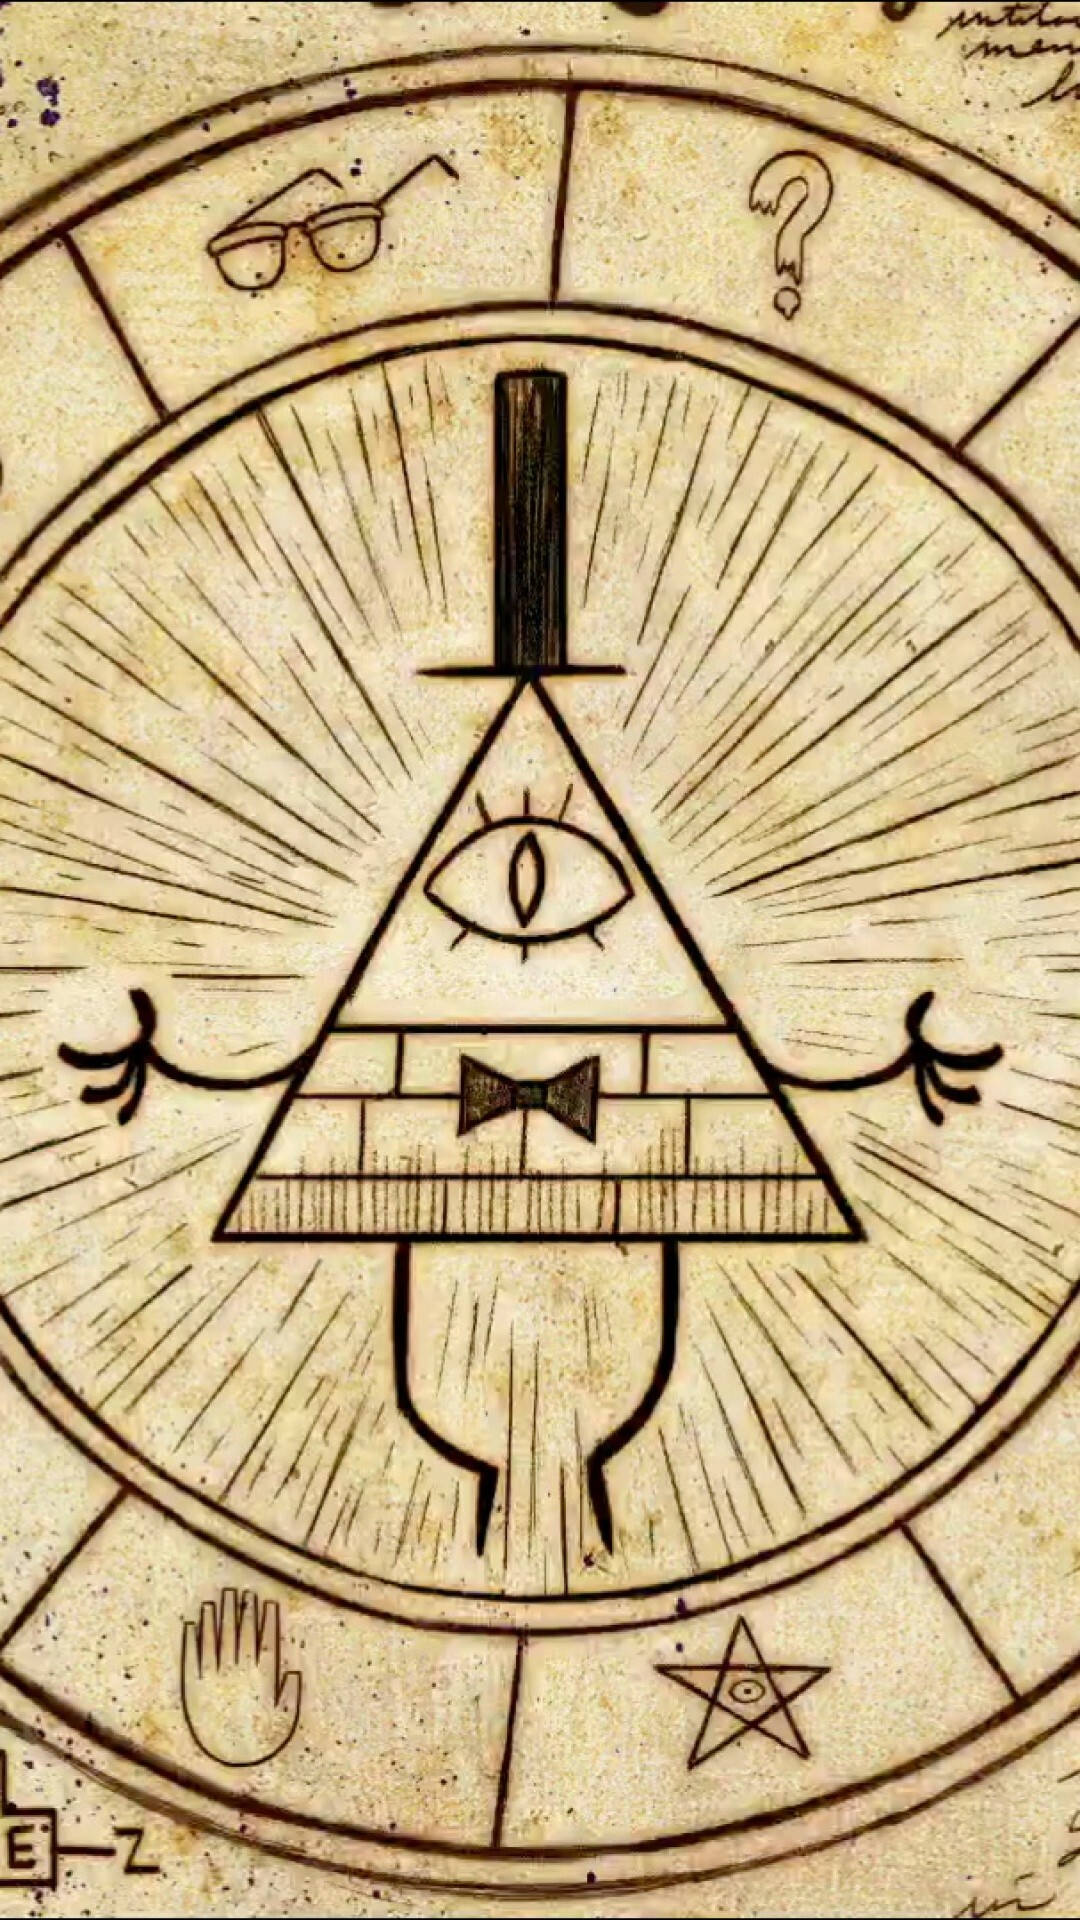 Gravity Falls: Bill Cipher, made his first physical appearance in "Dreamscaperers". 1080x1920 Full HD Wallpaper.